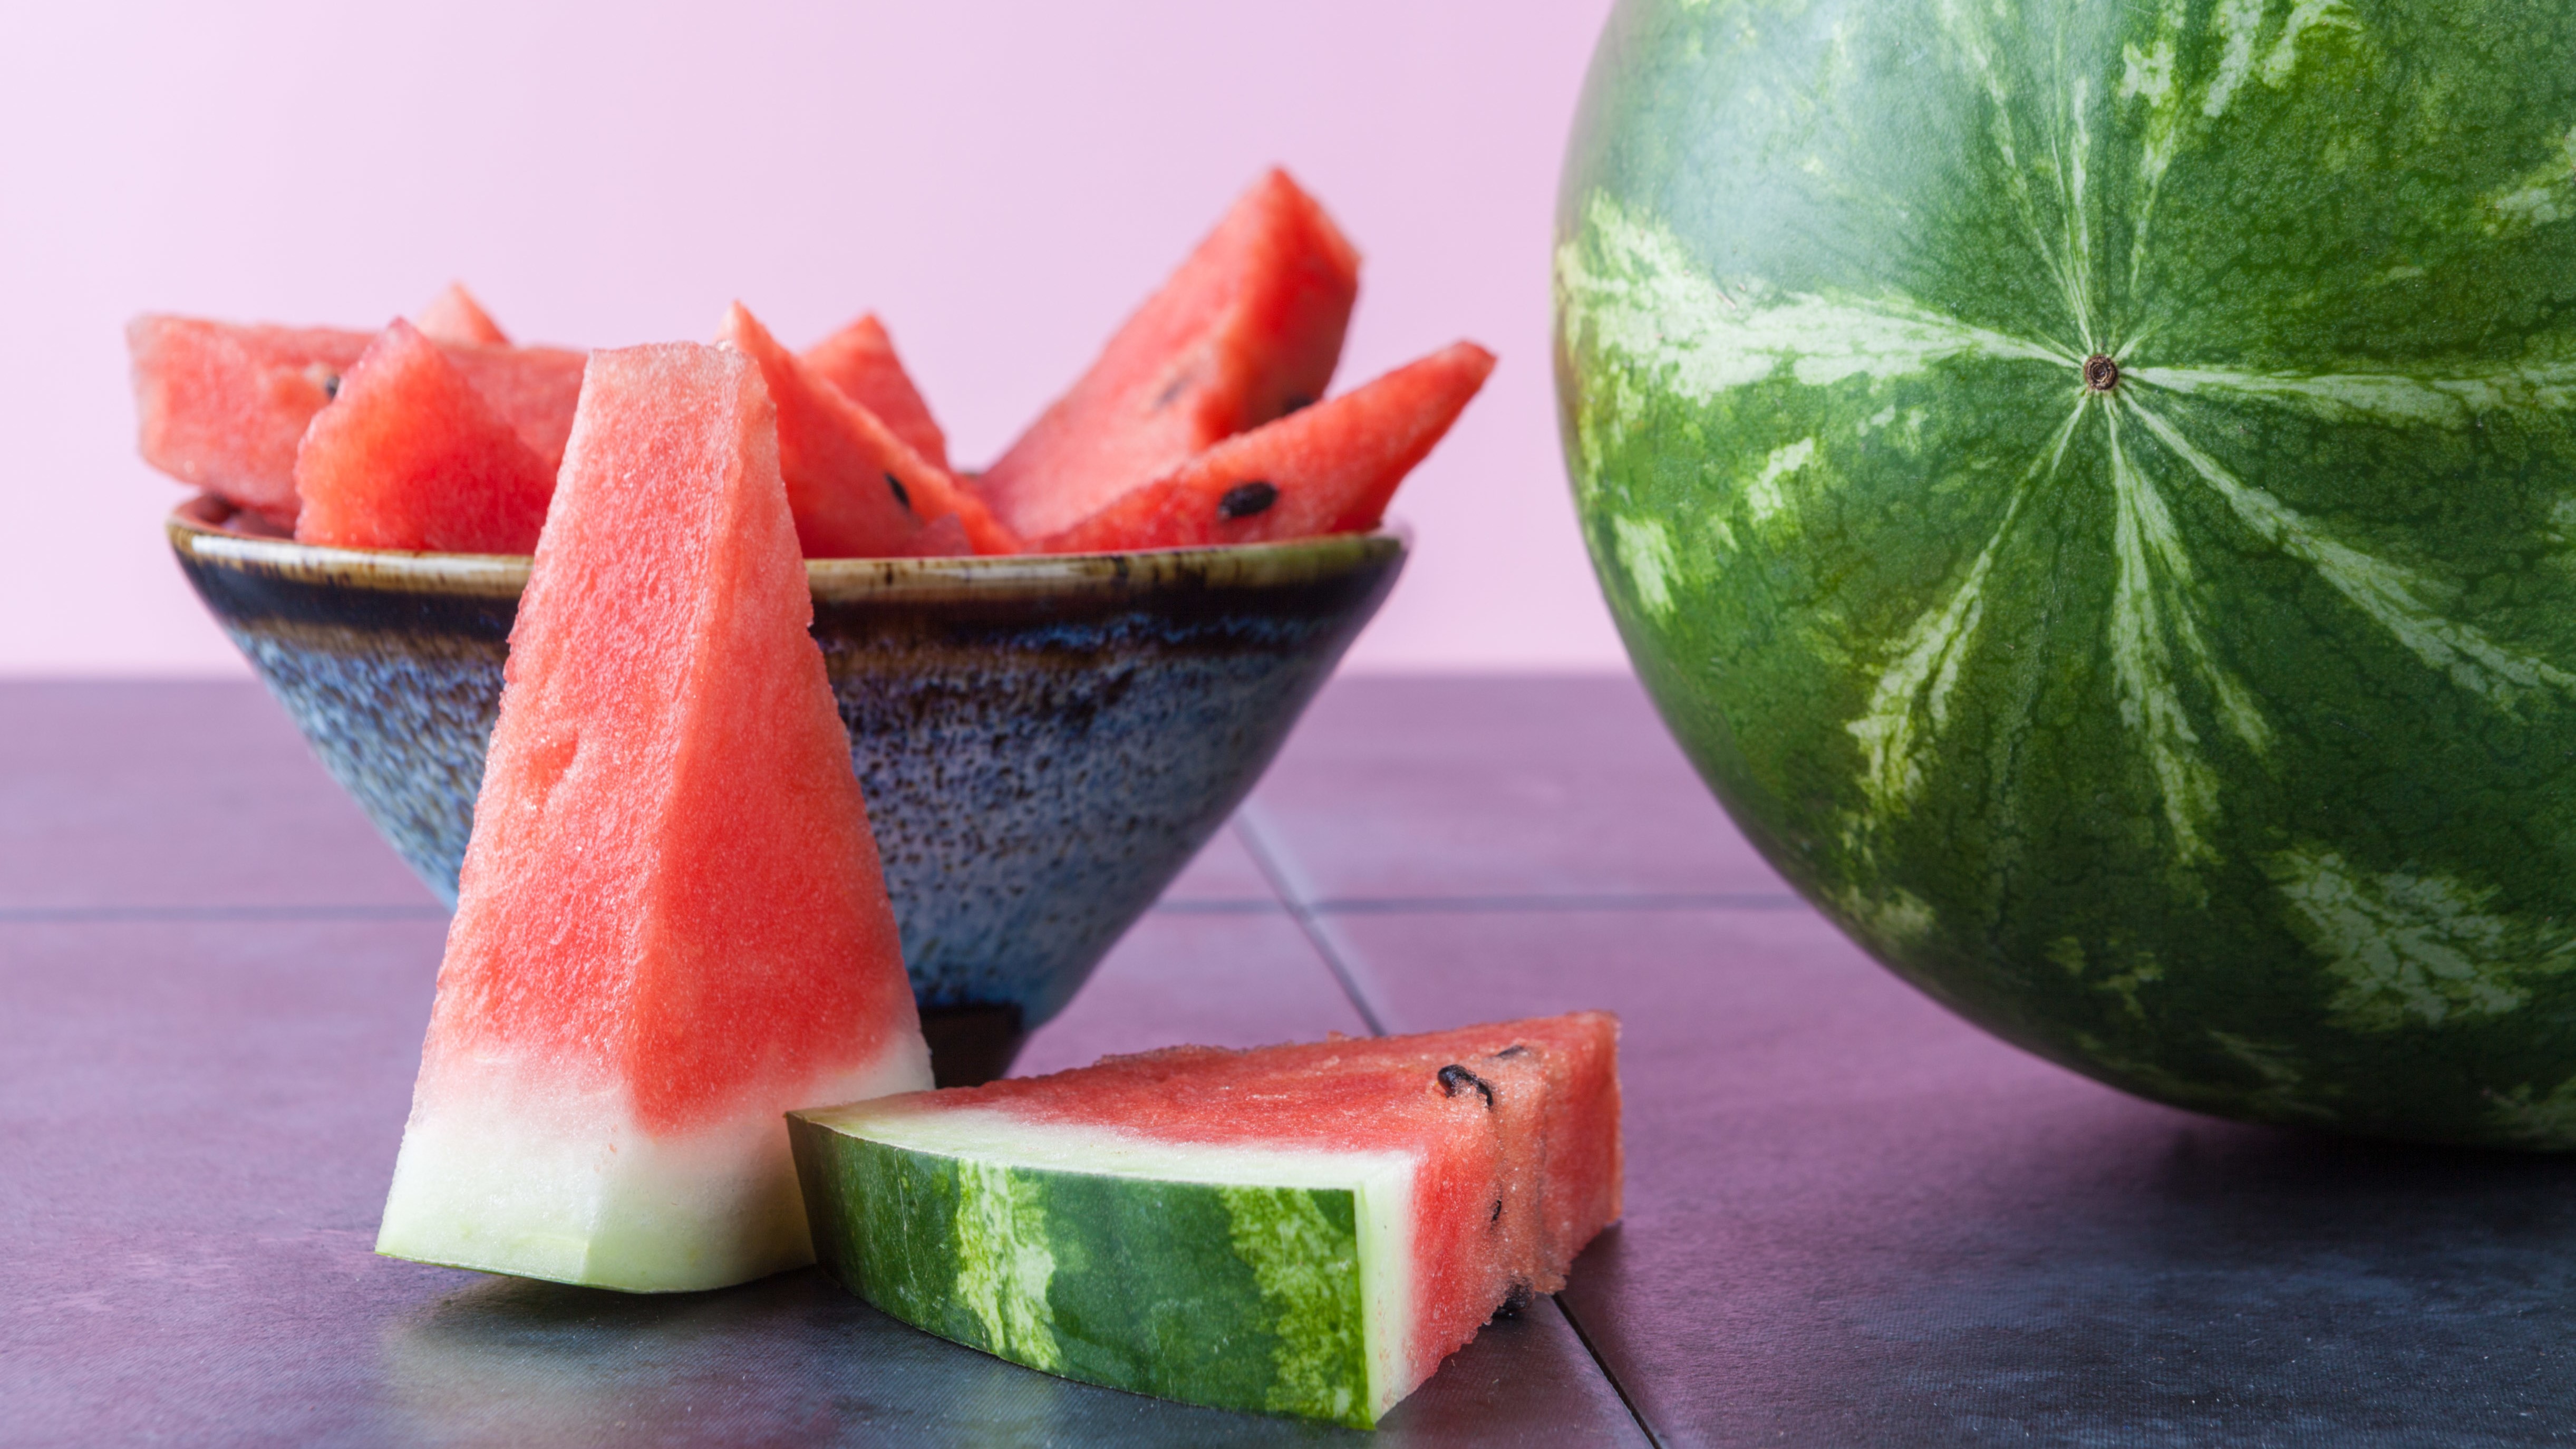 Watermelon Health Benefits Risks Nutrition Facts Live Science